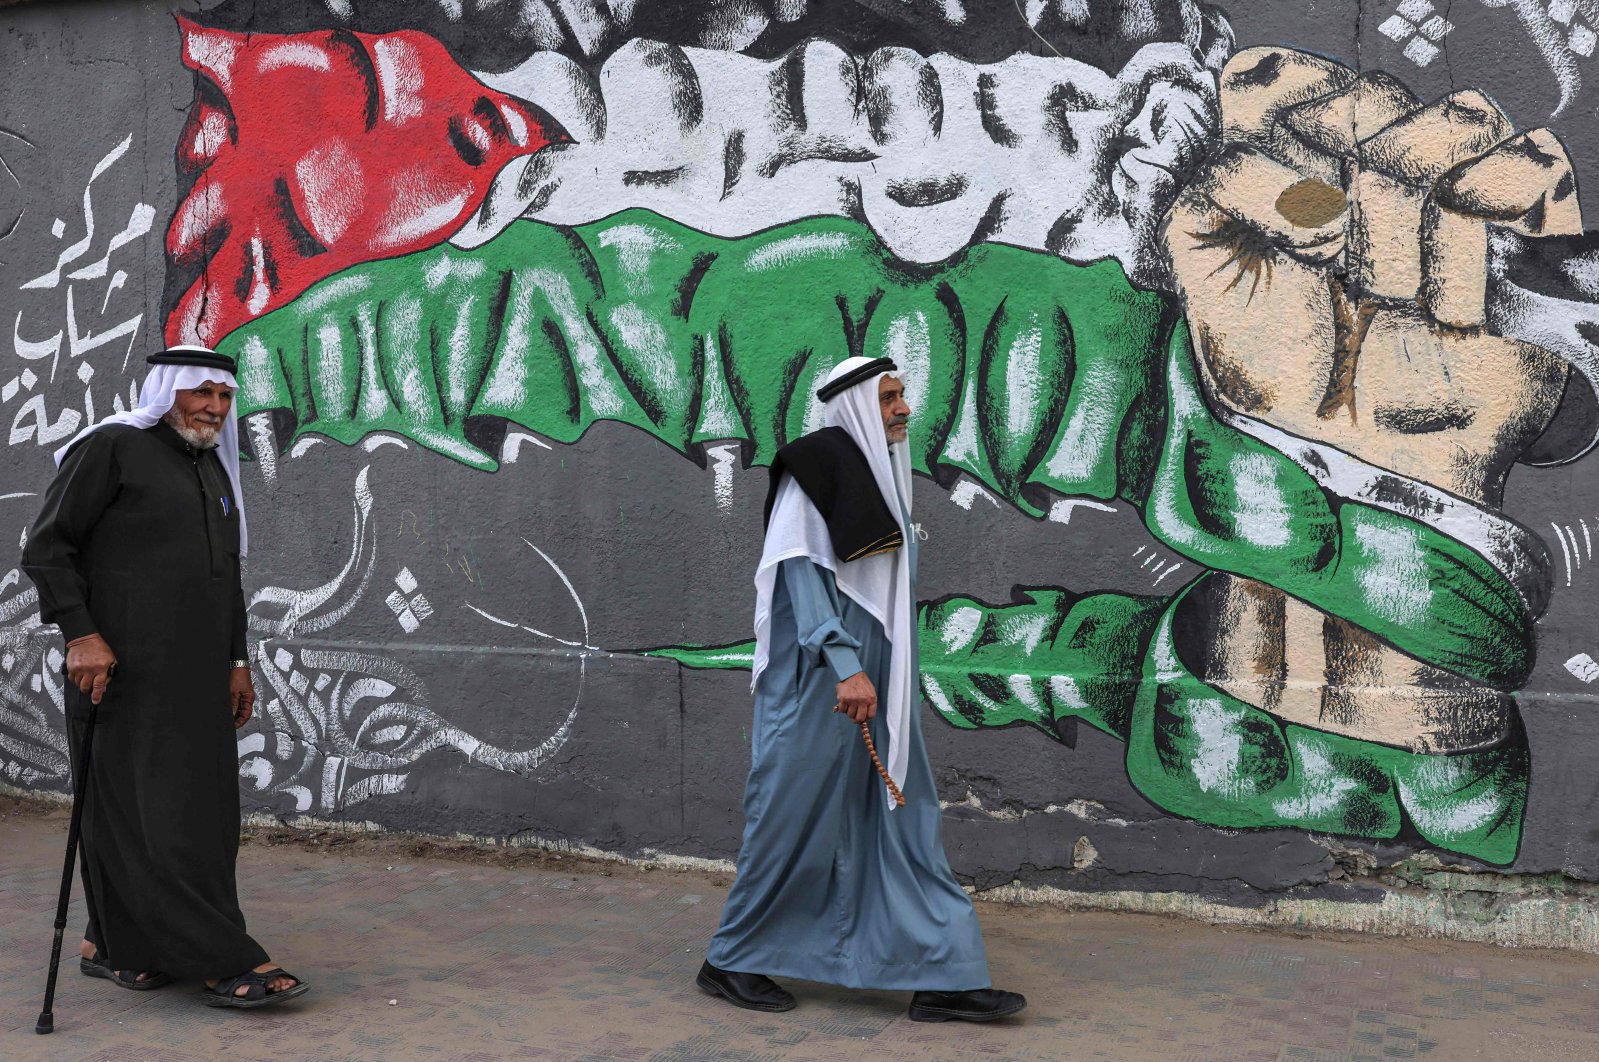 Palestinians walk past a wall painting marking the 104th anniversary of Britain's Balfour Declaration, in Khan Yunis in the southern Gaza Strip, occupied Palestine, Nov. 2, 2021. (AFP Photo)